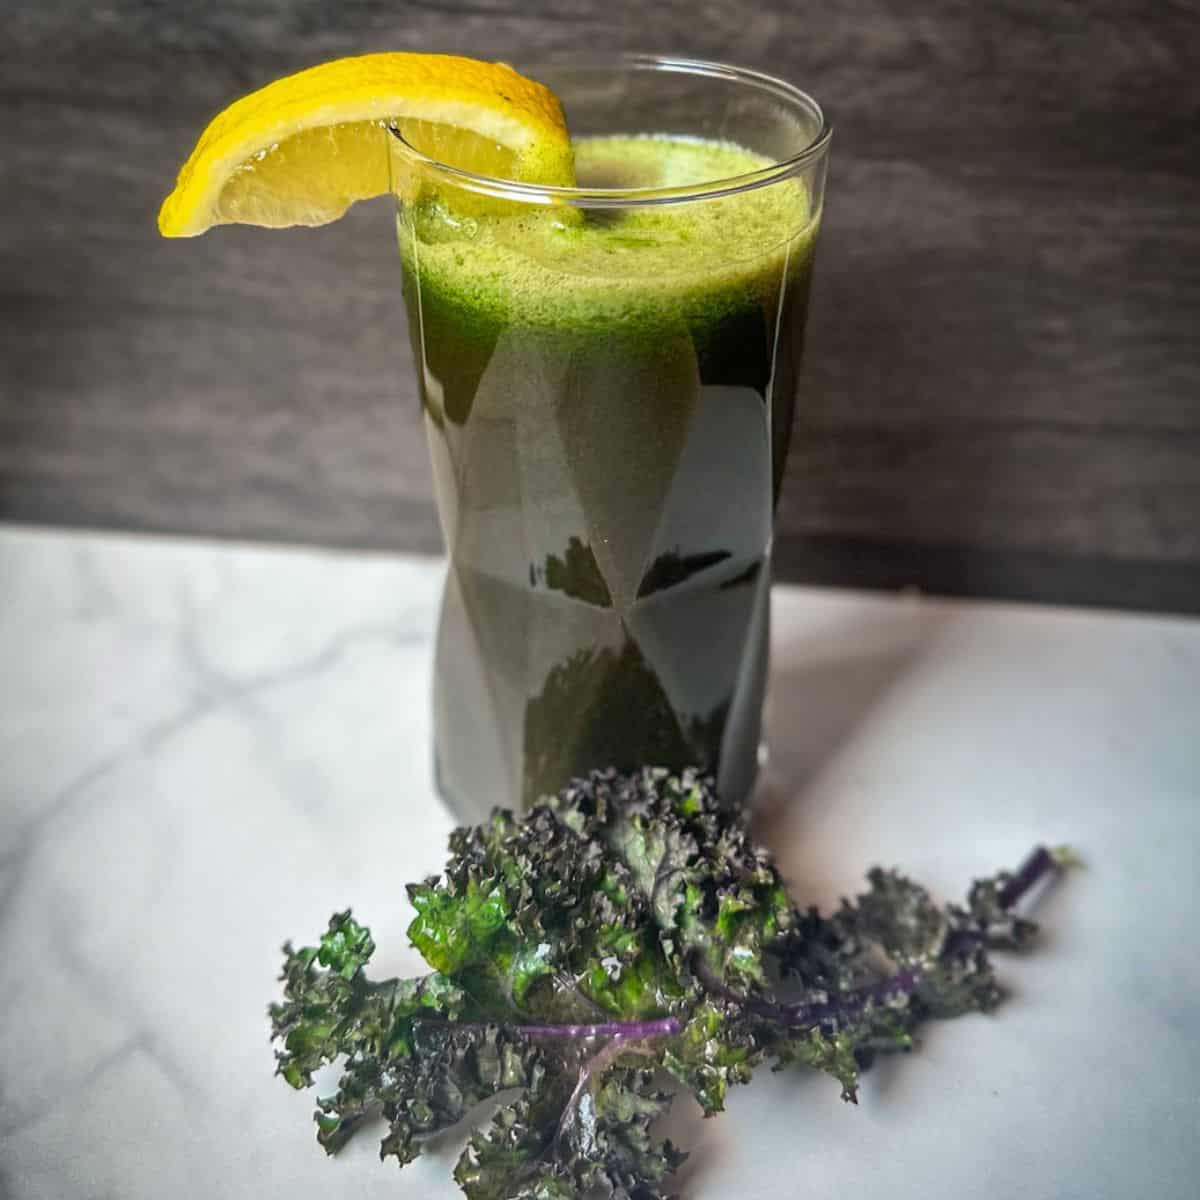 First Watch Kale Tonic Green Juice in a glass with light green foam at the top. The glass is garnished with a lemon wedge and a kale leaf at the base.